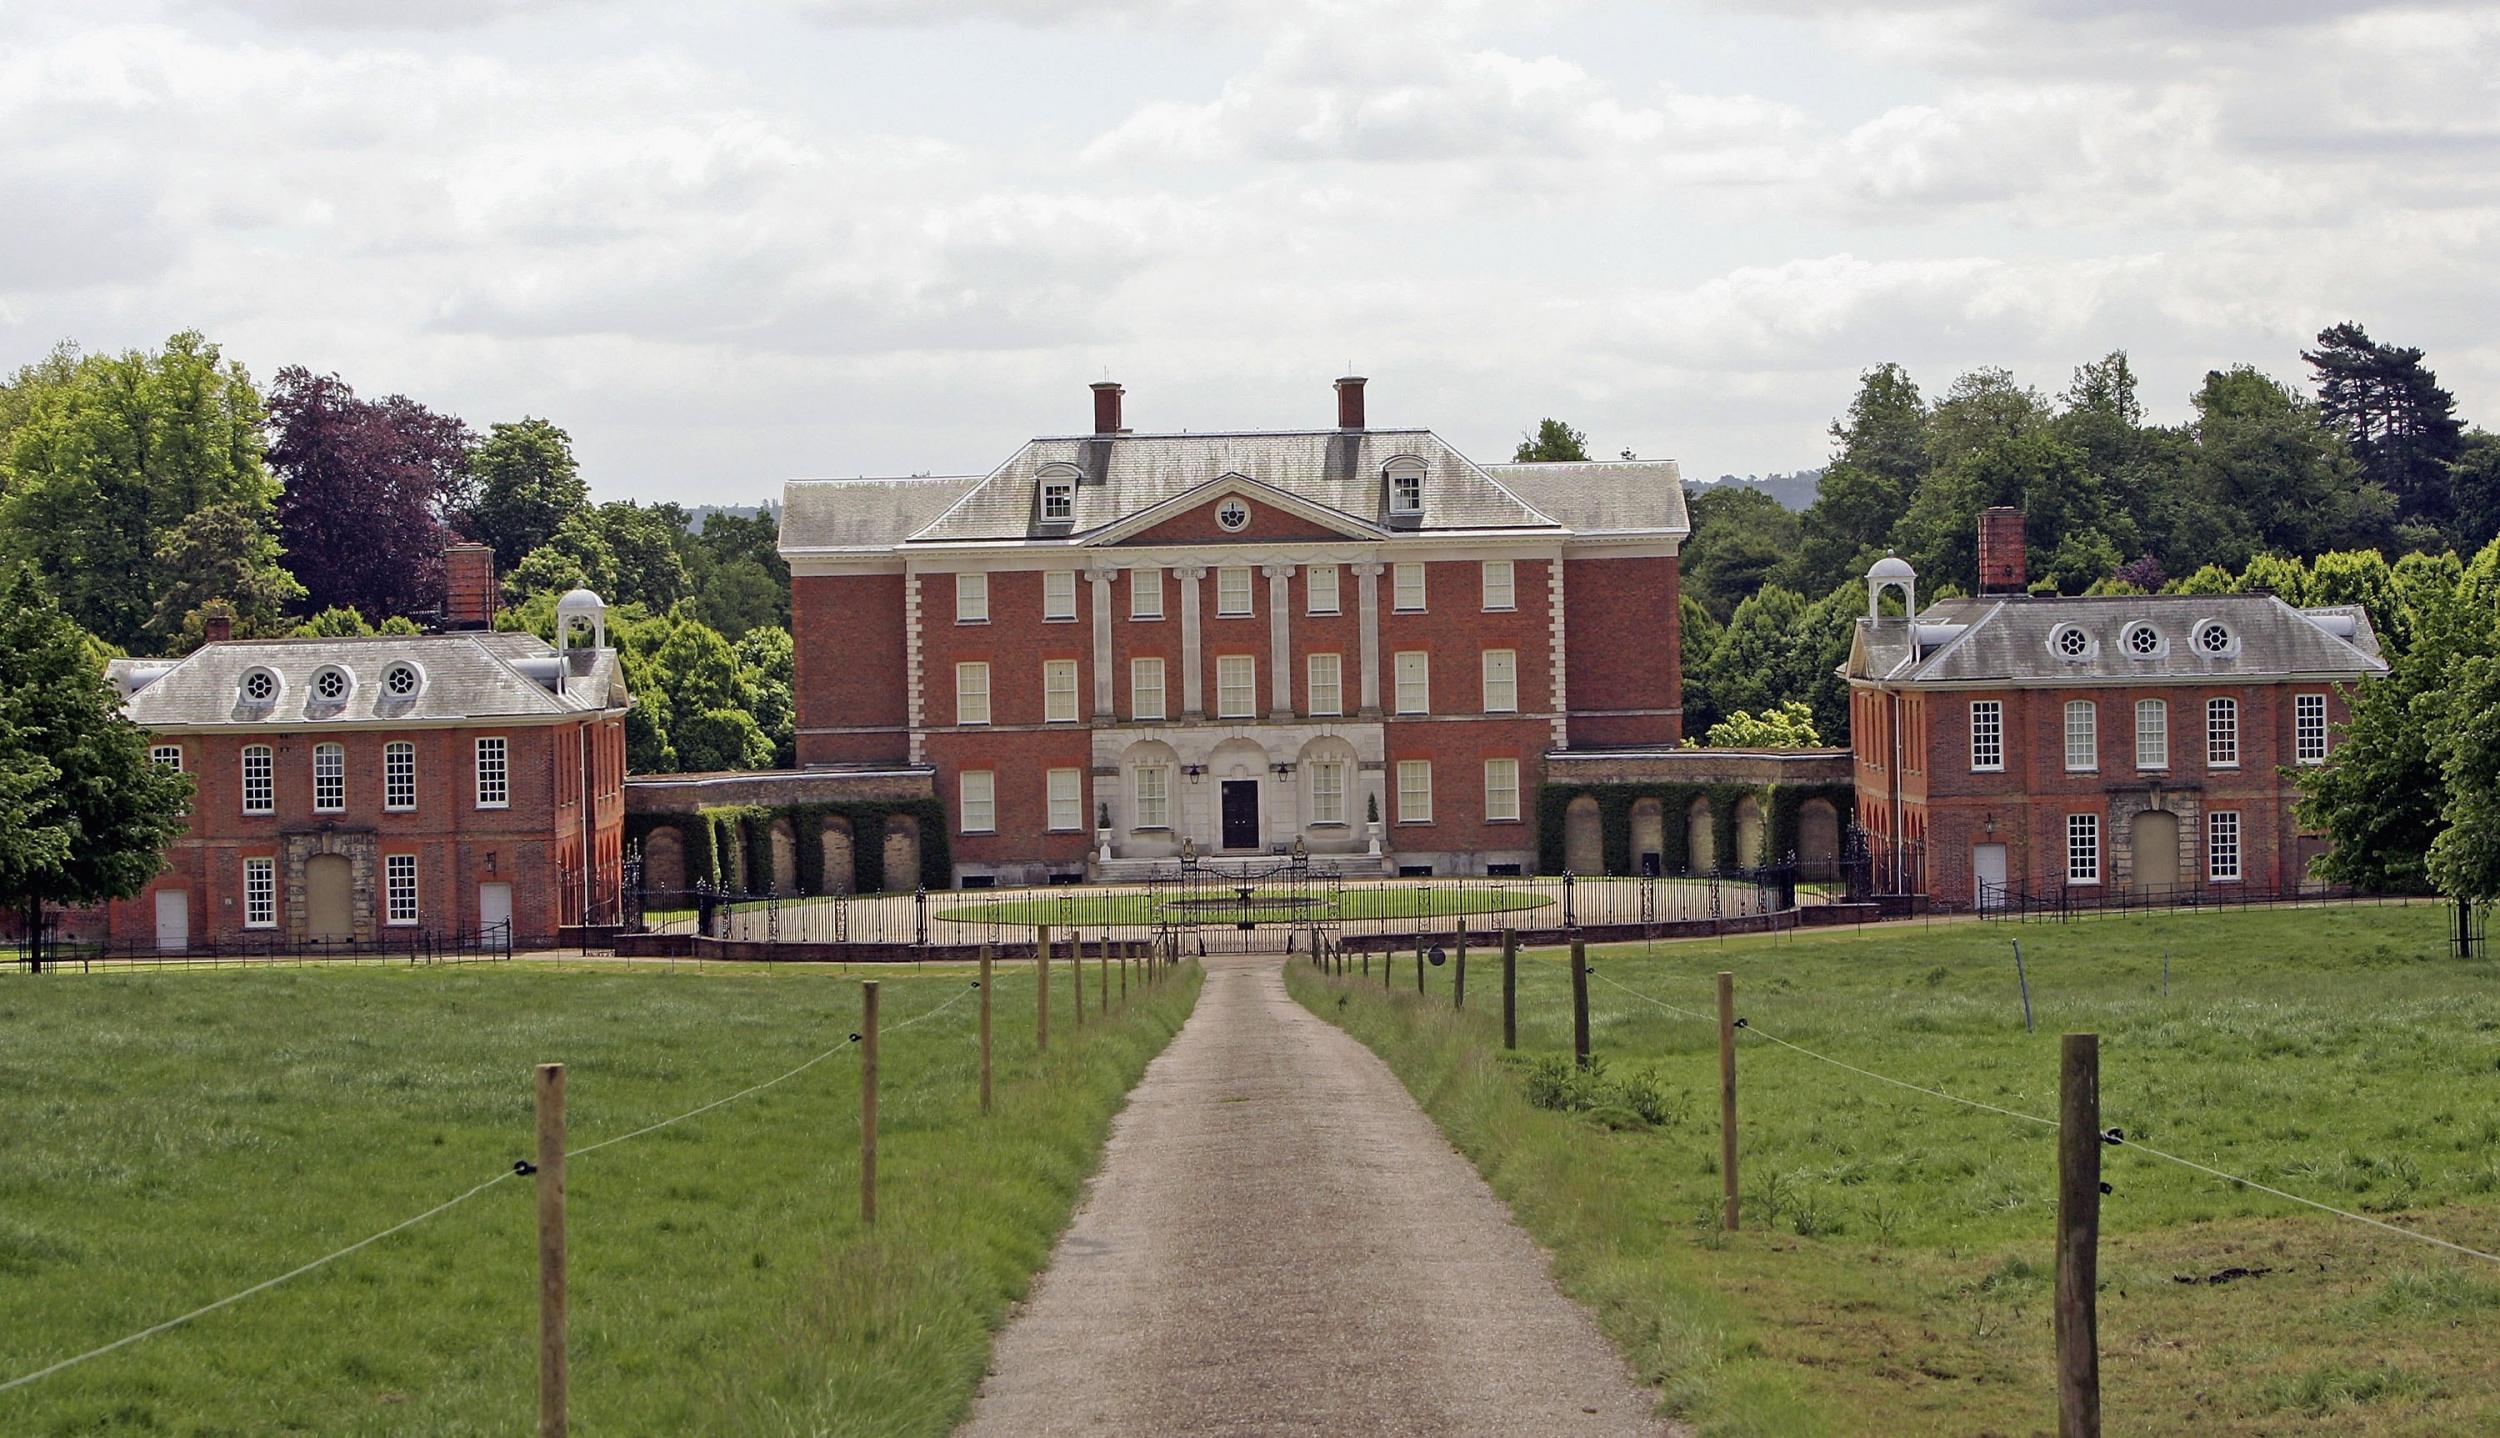 The 17th-century manor house Chevening has been used by foreign secretaries since the 1980s